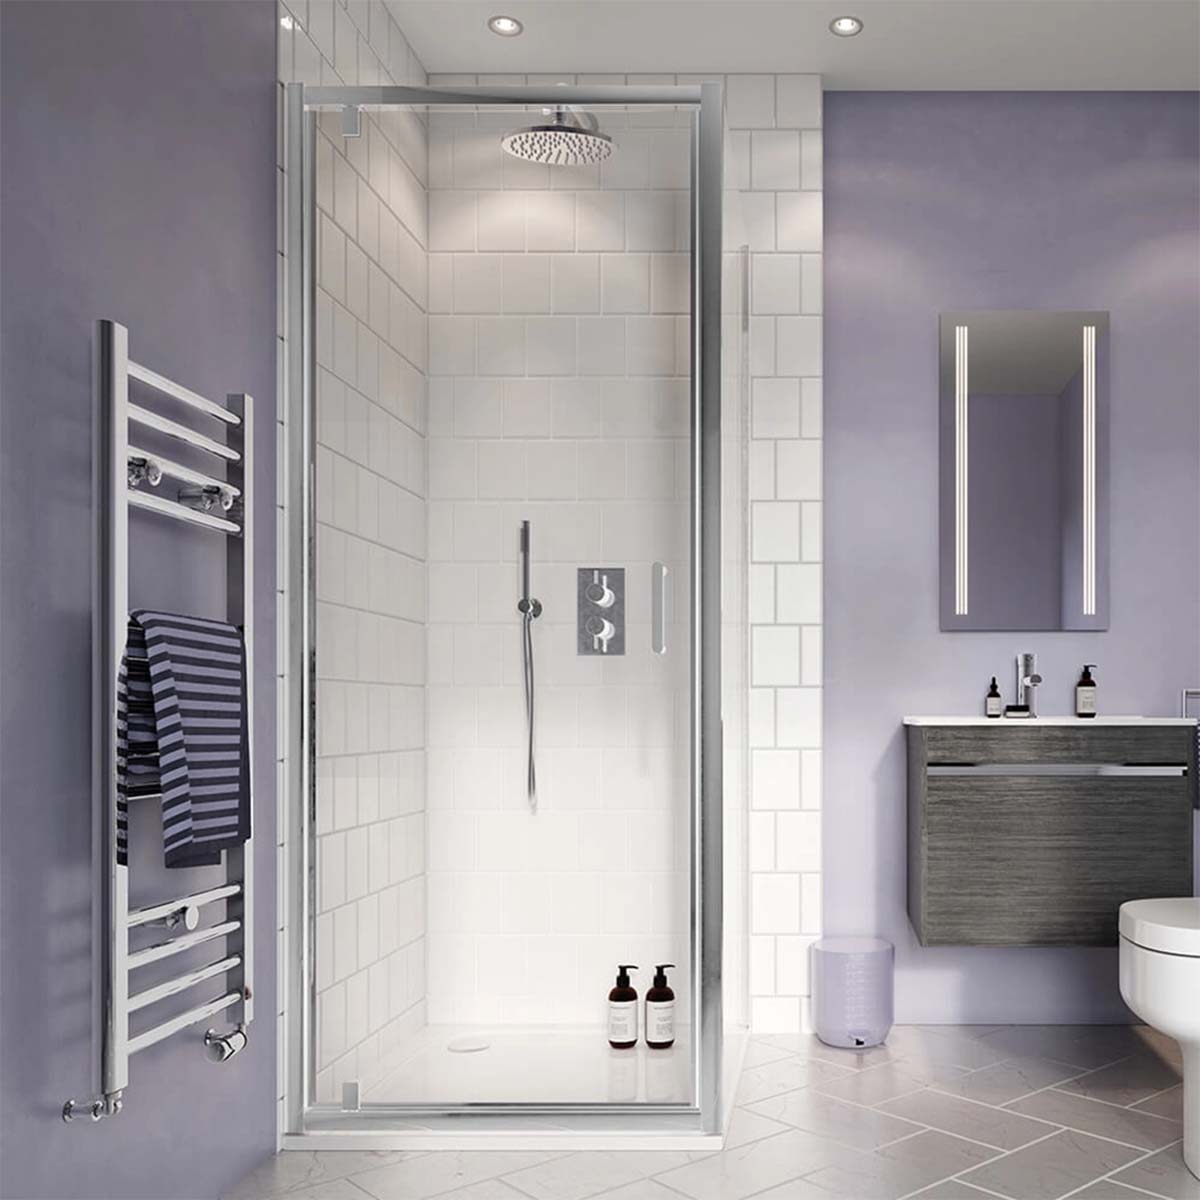 Crosswater Kai 2 Outlet Thermostatic Shower Valve with Pencil Handset and Fixed Overhead Lifestyle